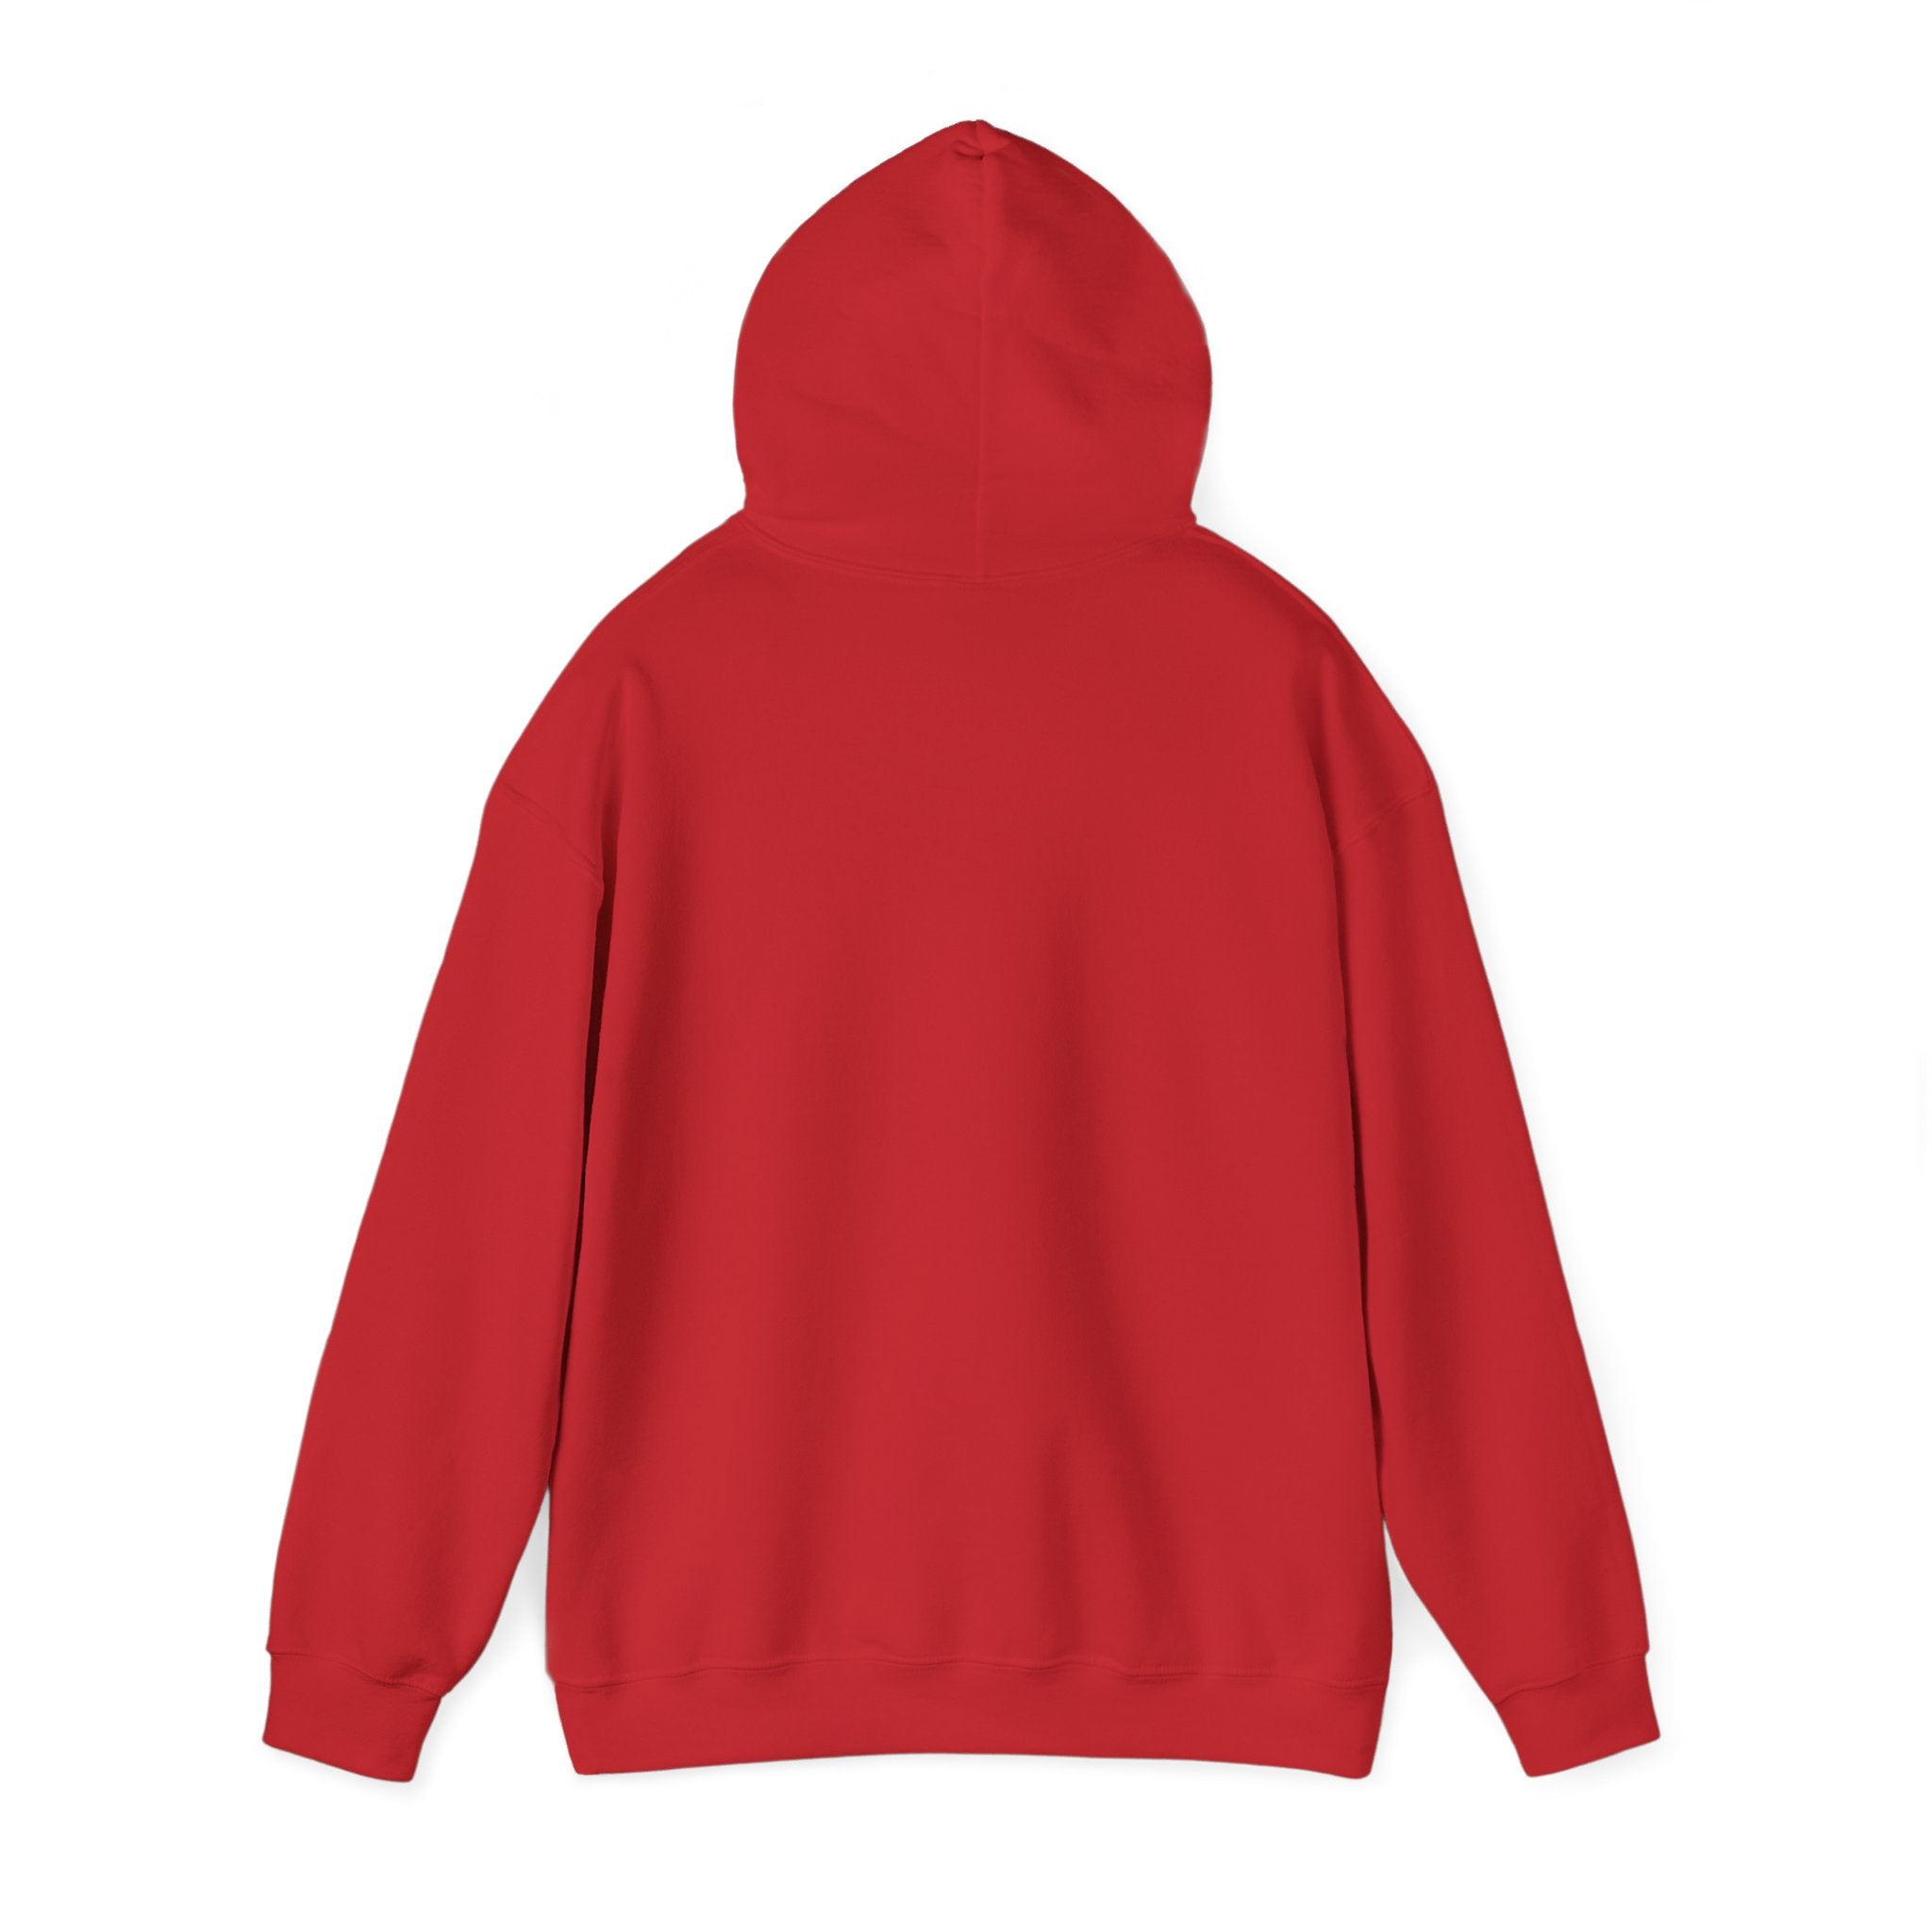 A cozy, plain red My Otter Shirt - Hooded Sweatshirt viewed from the back, featuring a hood and long sleeves.